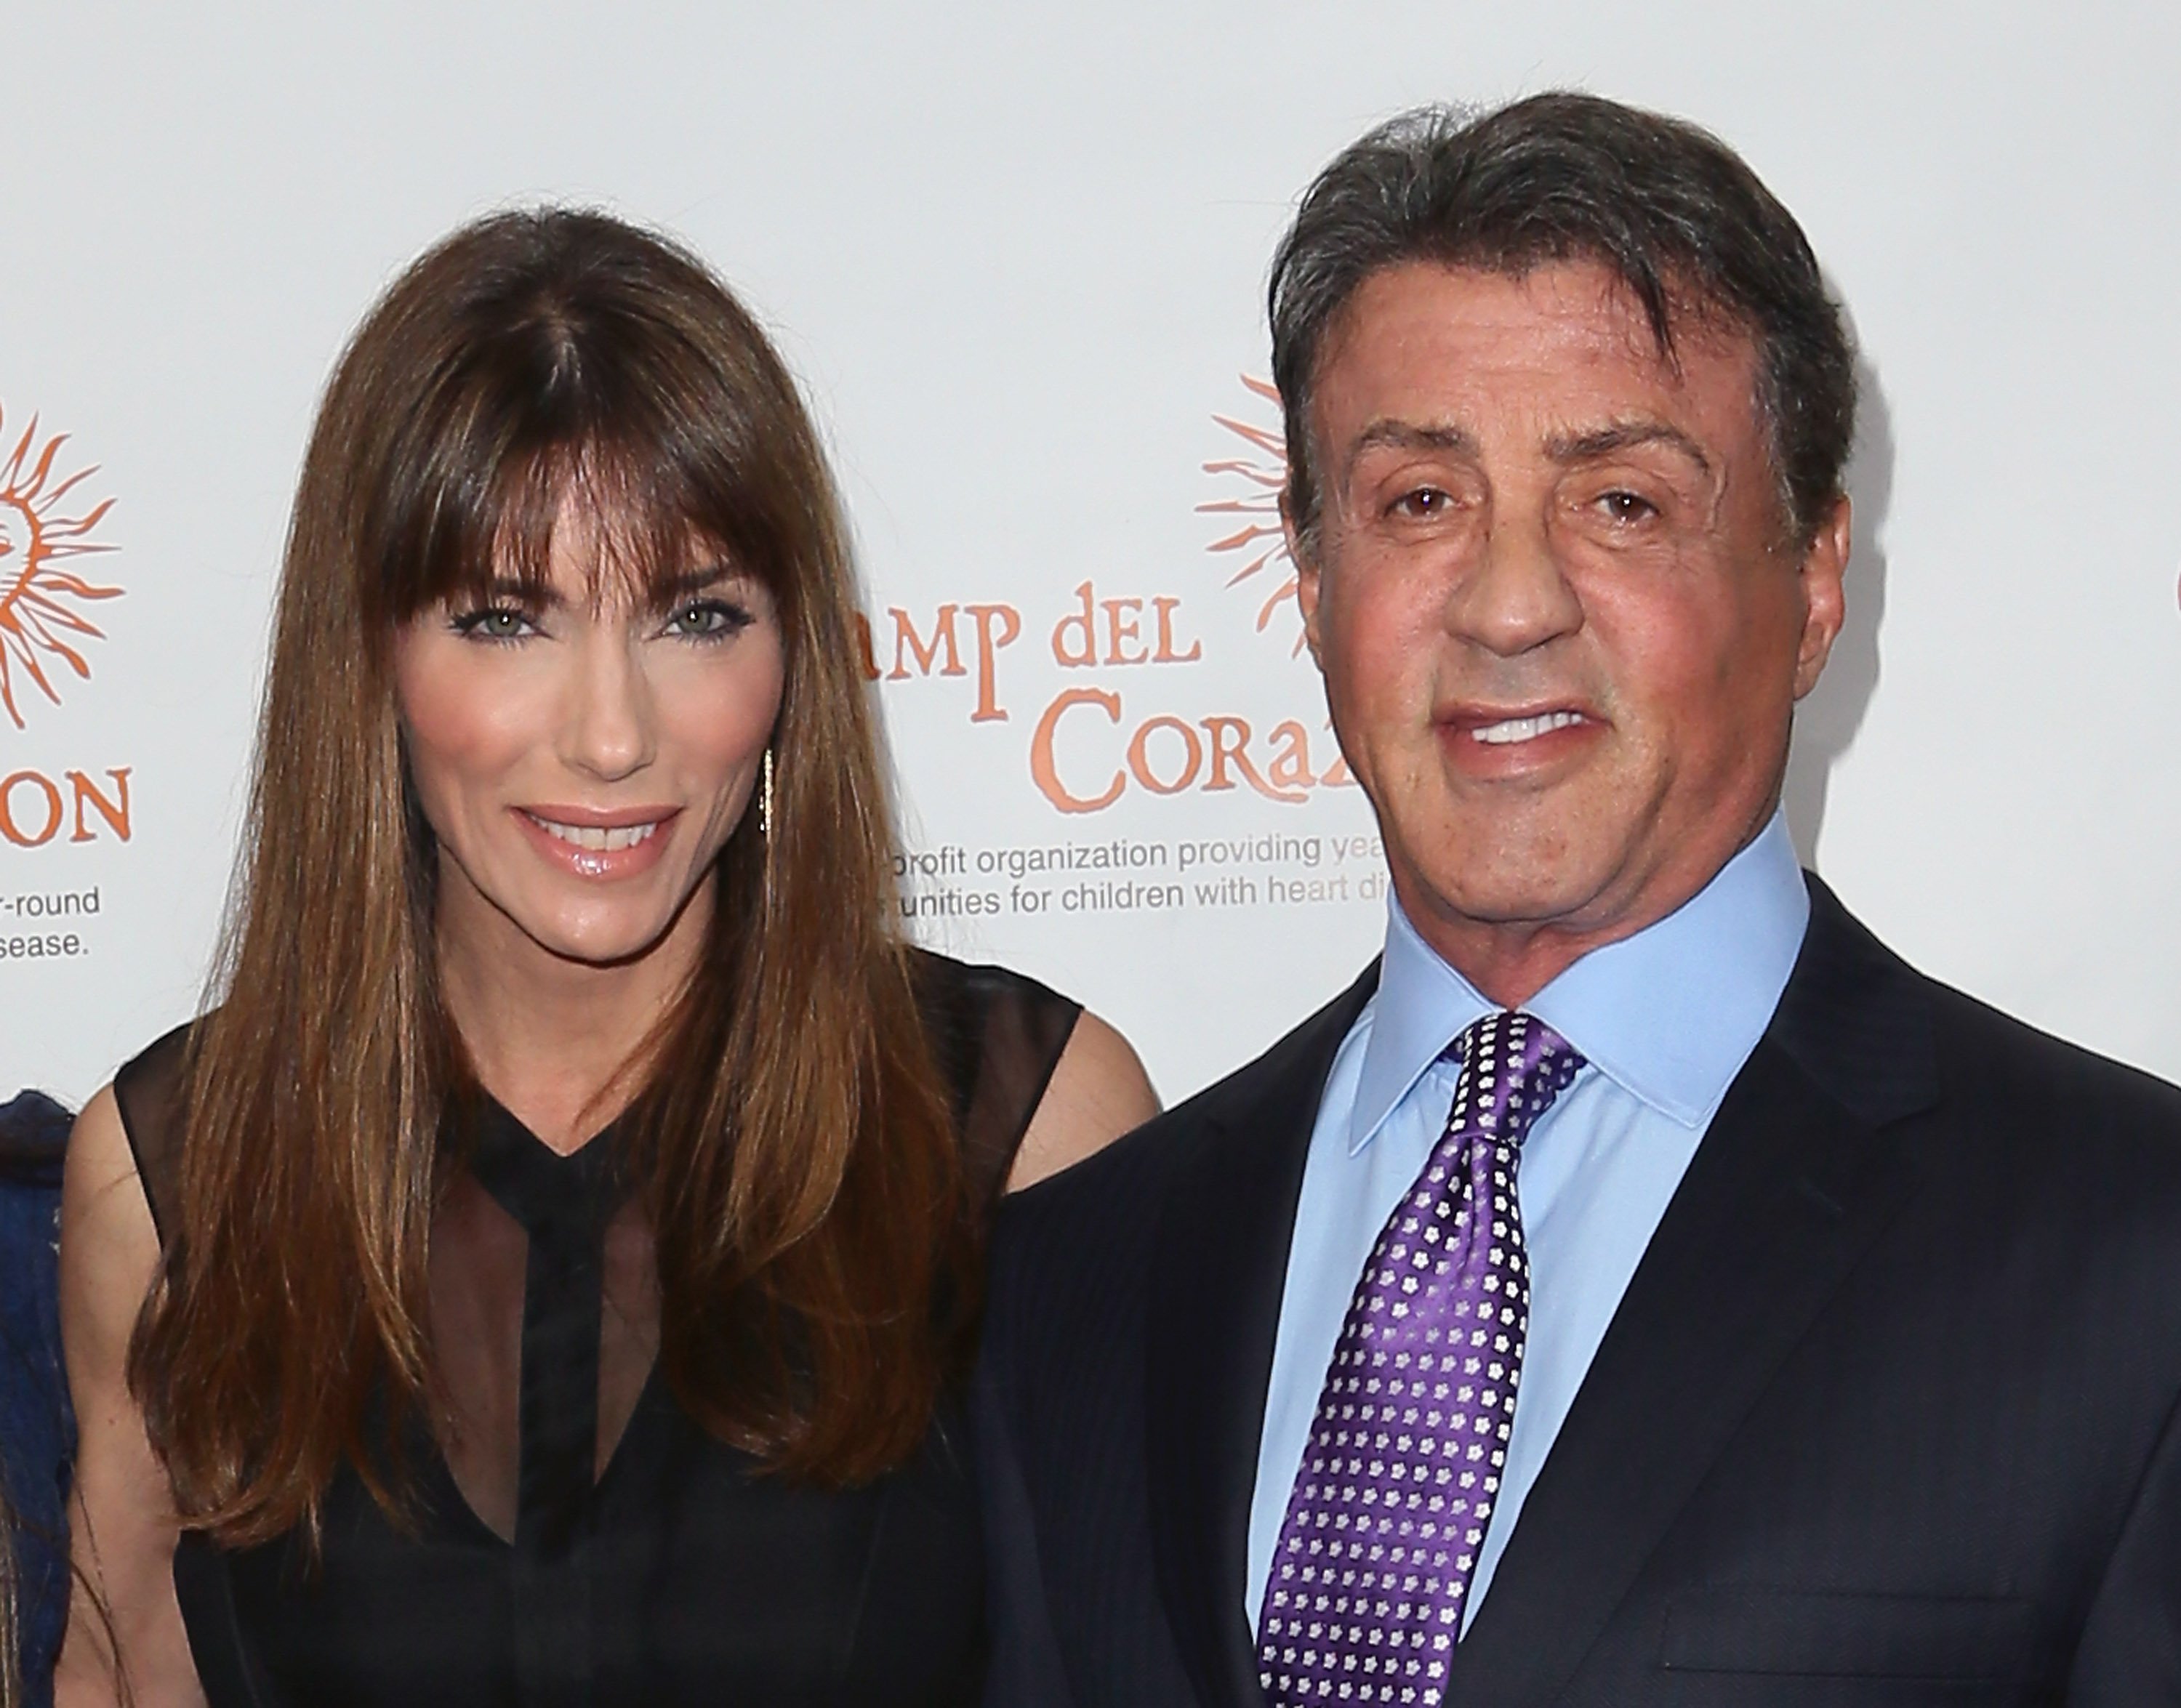 Sylvester Stallone and wife Jennifer Flavin at Camp del Corazon's 11th Annual Gala del Sol at the Ray Dolby Ballroom at Hollywood & Highland Center on April 19, 2014 | Source: Getty Images